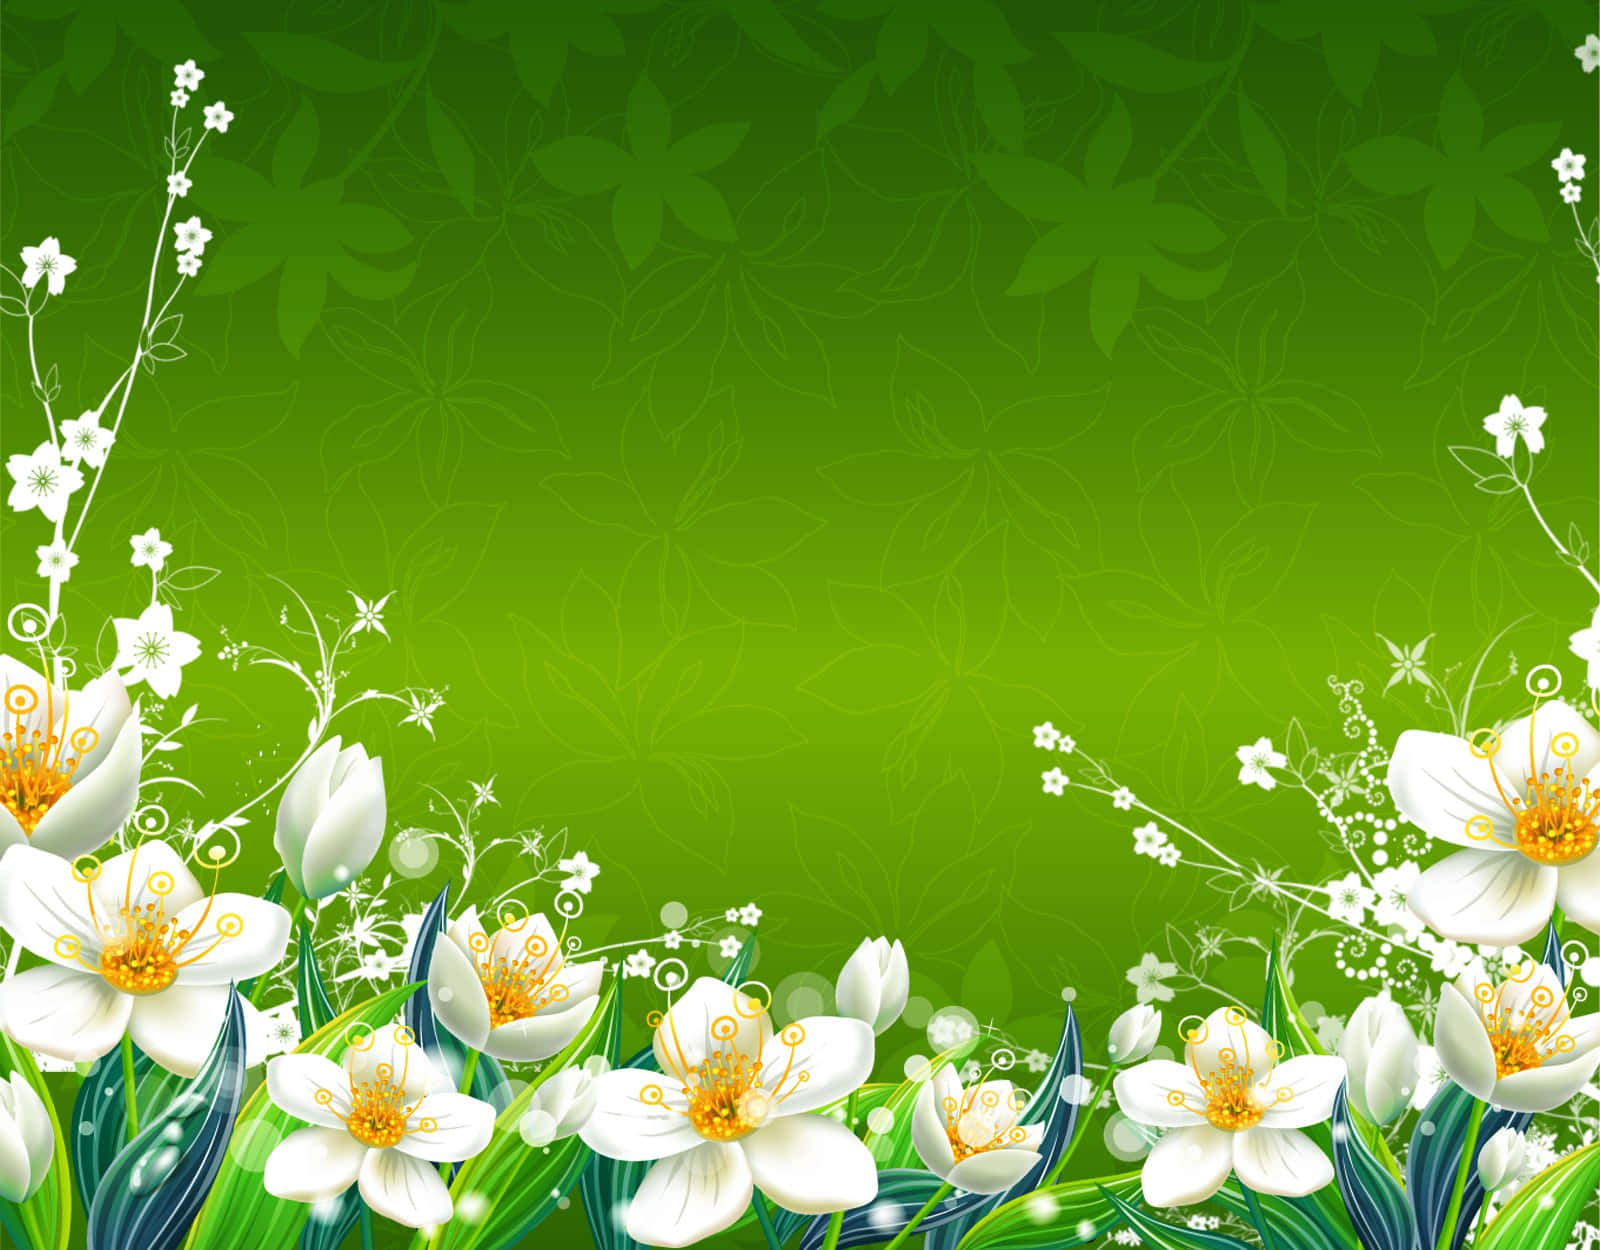 A beautiful green flower on a background of grass